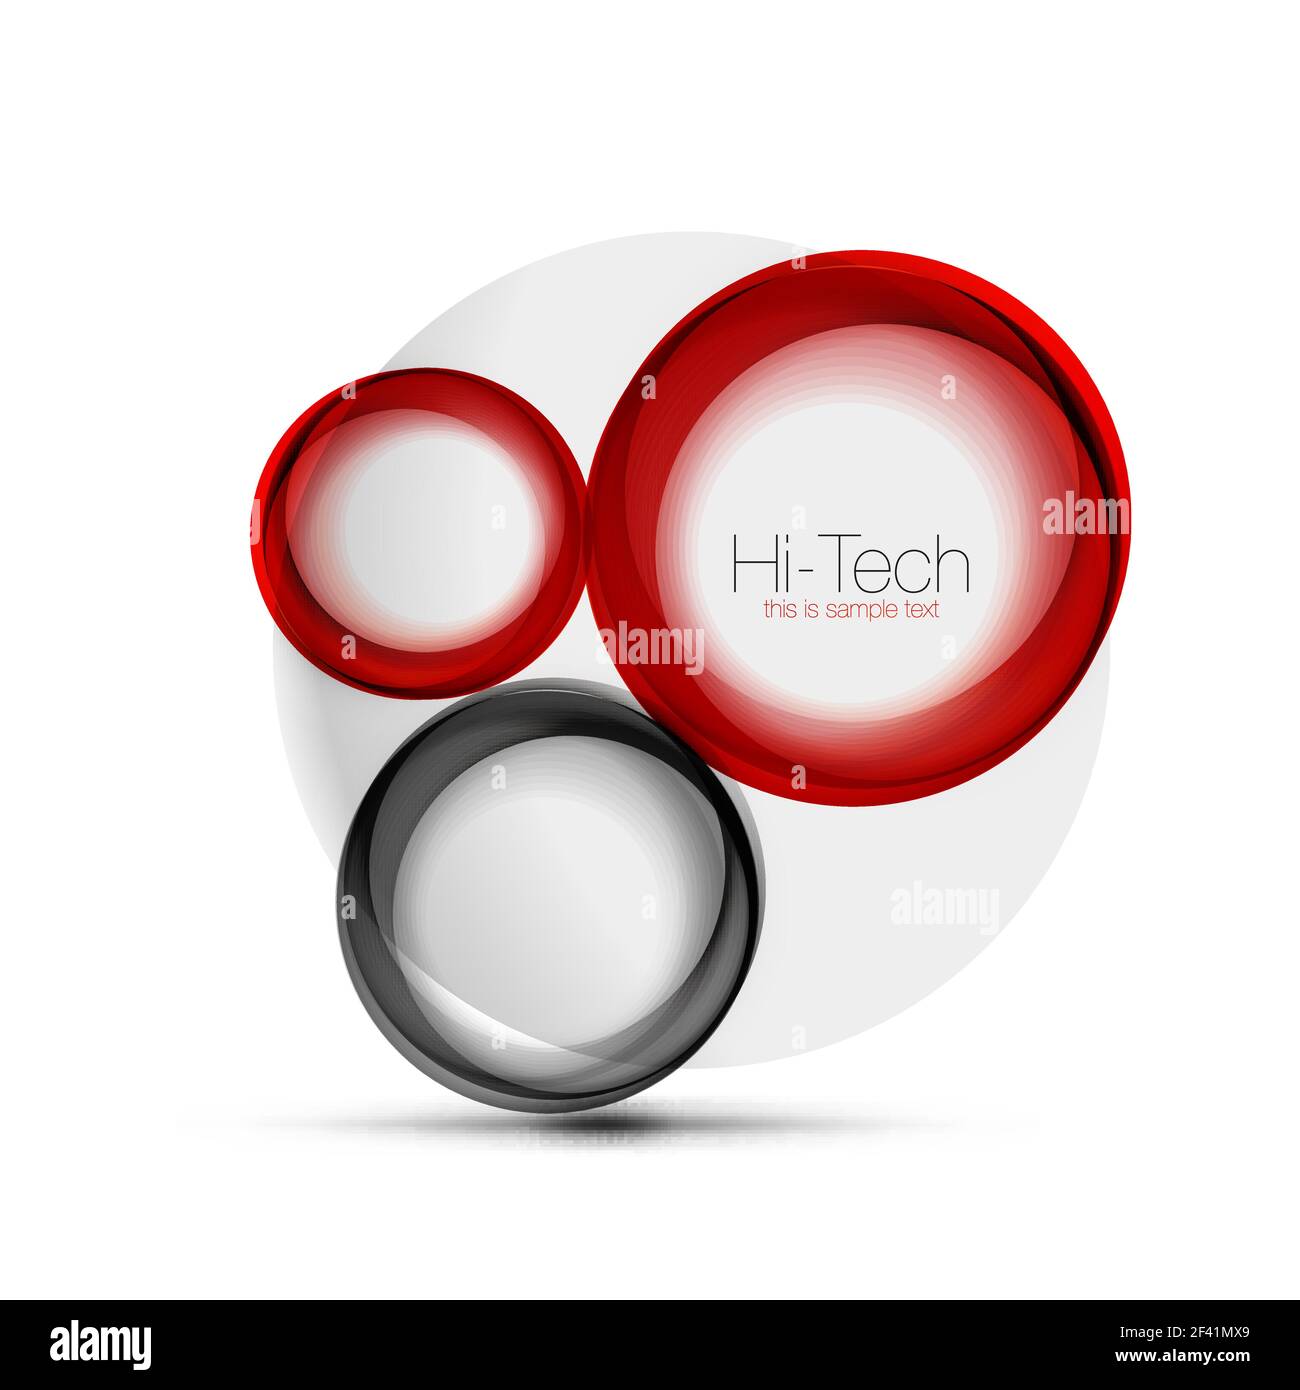 Circle web layout - digital techno spheres - web banner, button or icon with text. Glossy swirl color abstract circle design, hi-tech futuristic symbol with color rings and grey metallic element. Circle web layout - digital techno spheres - web banner, button or icon with text. Glossy swirl color abstract circle design, hi-tech futuristic symbol with color rings and grey metallic element. Vector illustration Stock Vector